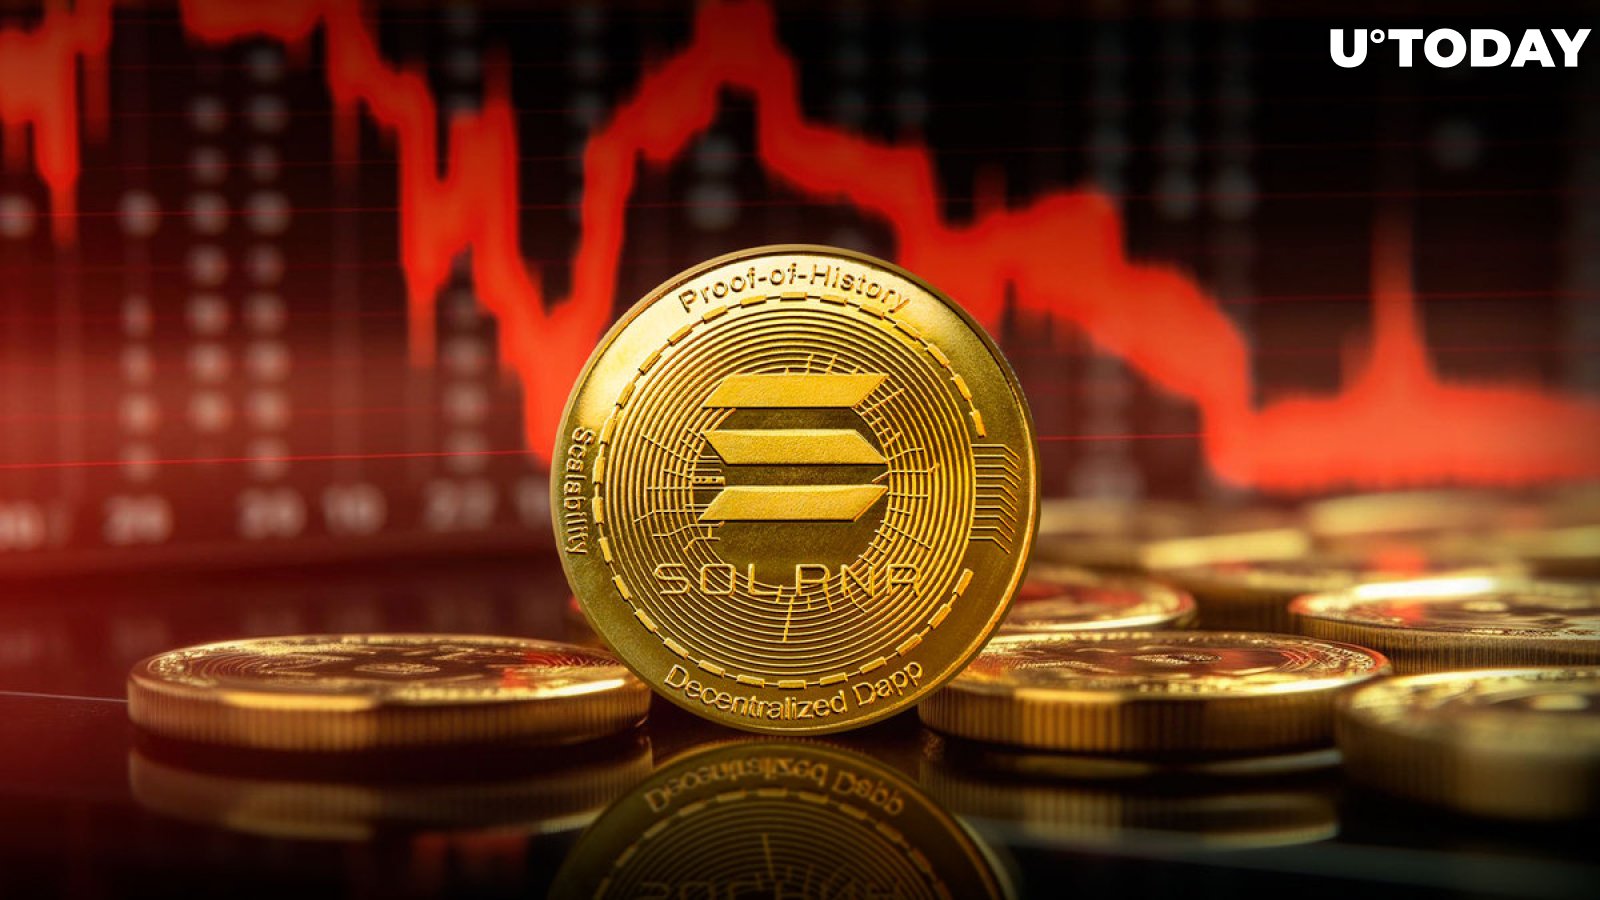 Solana (SOL) Plunges by 10%, Here's Possible Reason Behind Drop